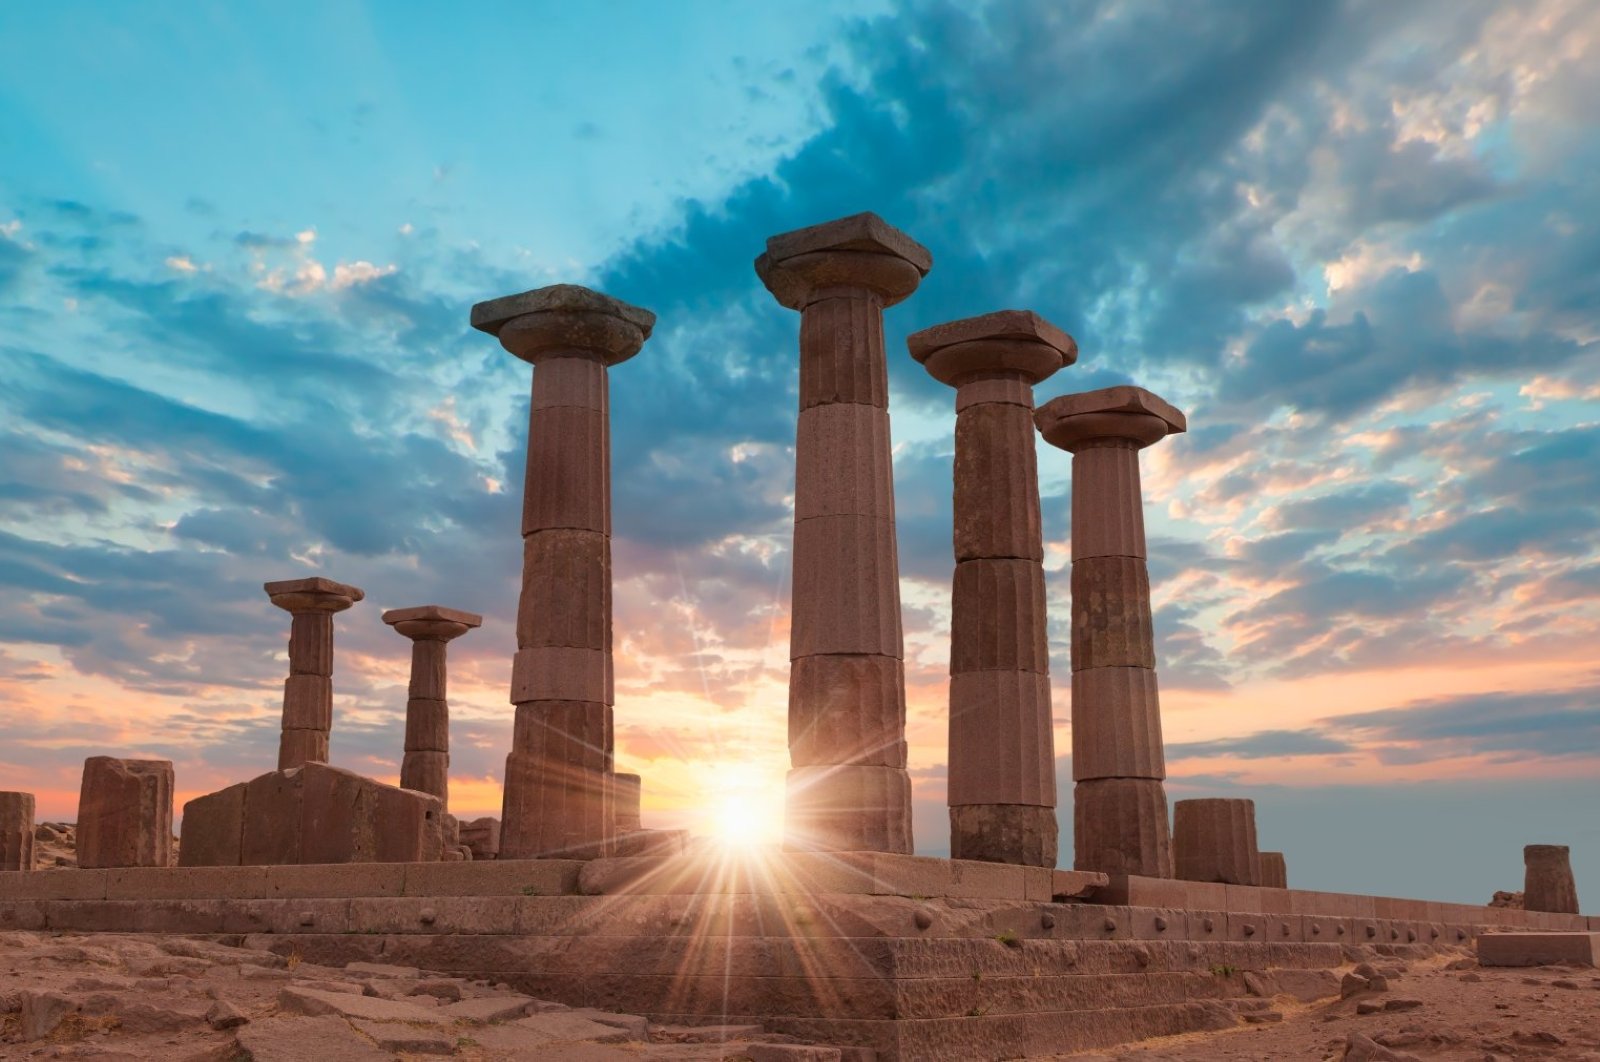 The ruins of ancient city Assos with the Temple of Athena, amphitheater and necropolis, Çanakkale, Türkiye. (SHUTTERSTOCK PHOTO)